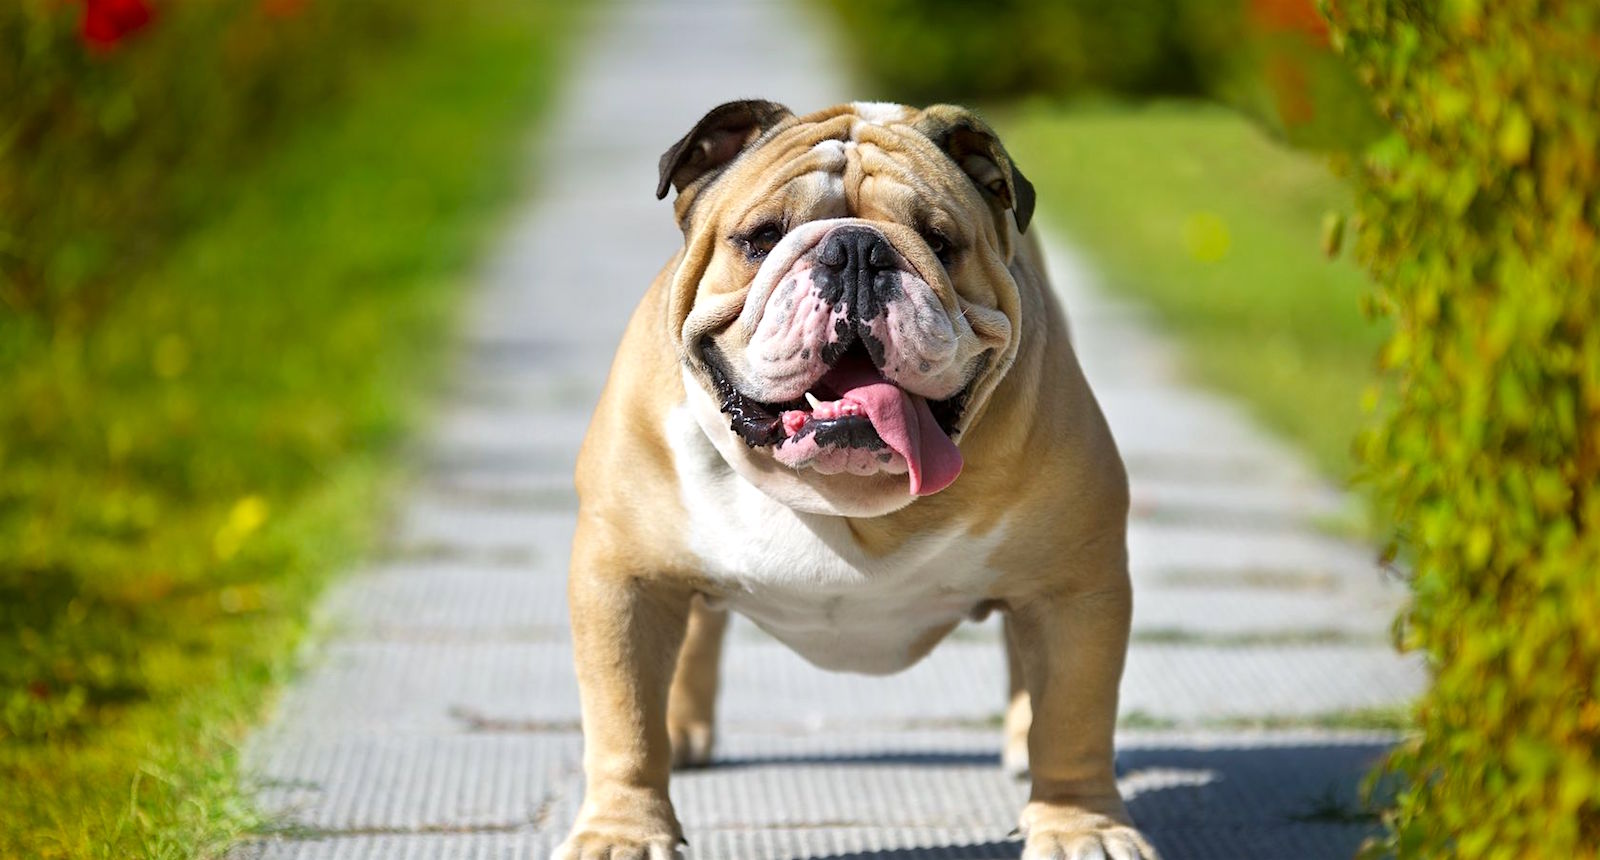 Only the Biggest Dog Lovers Can Identify All 20 of These Breeds 🐾 — Can You? English bulldog